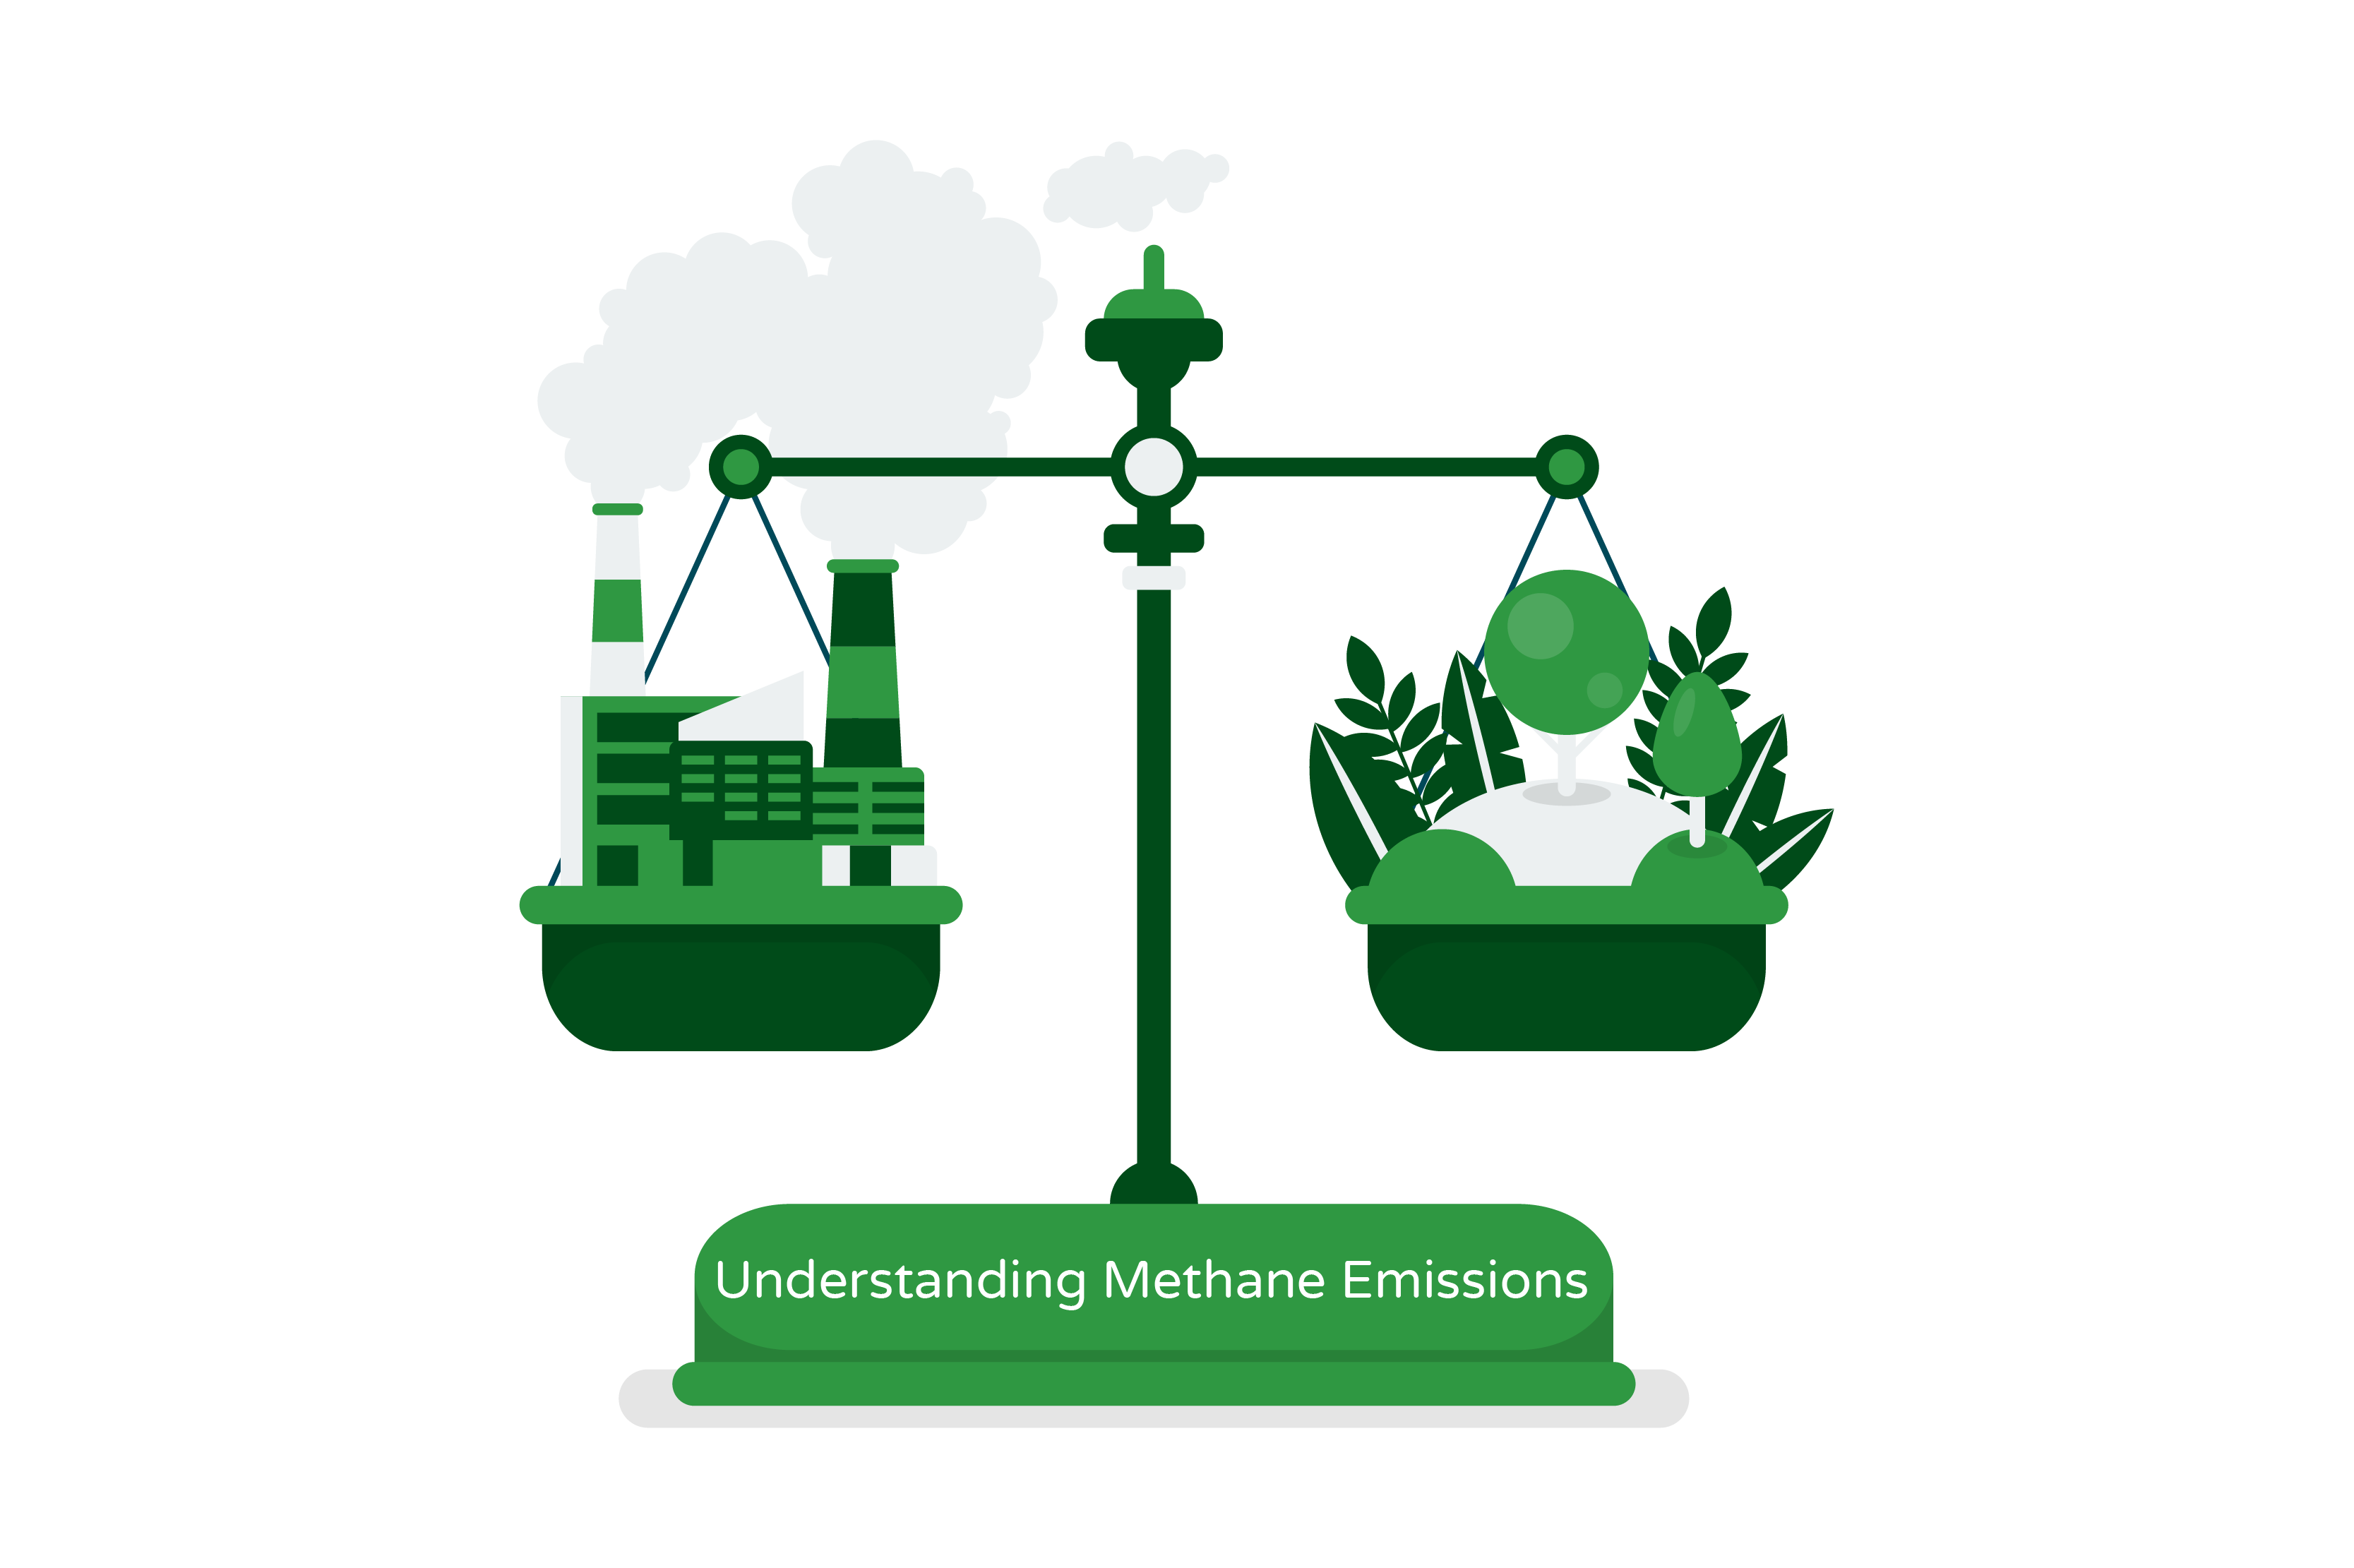 An image illustrating the importance of the global methane pledge. The visual shows a scale with a globe filled with greenery on one side, and a factory emitting harmful gases on the other side. The image highlights the balance between environmental protection and industrial development, suggesting that the global methane pledge is a crucial step in finding a sustainable balance between the two. The image also highlights the potential benefits of reducing methane emissions, such as preserving the natural environment and improving public health.